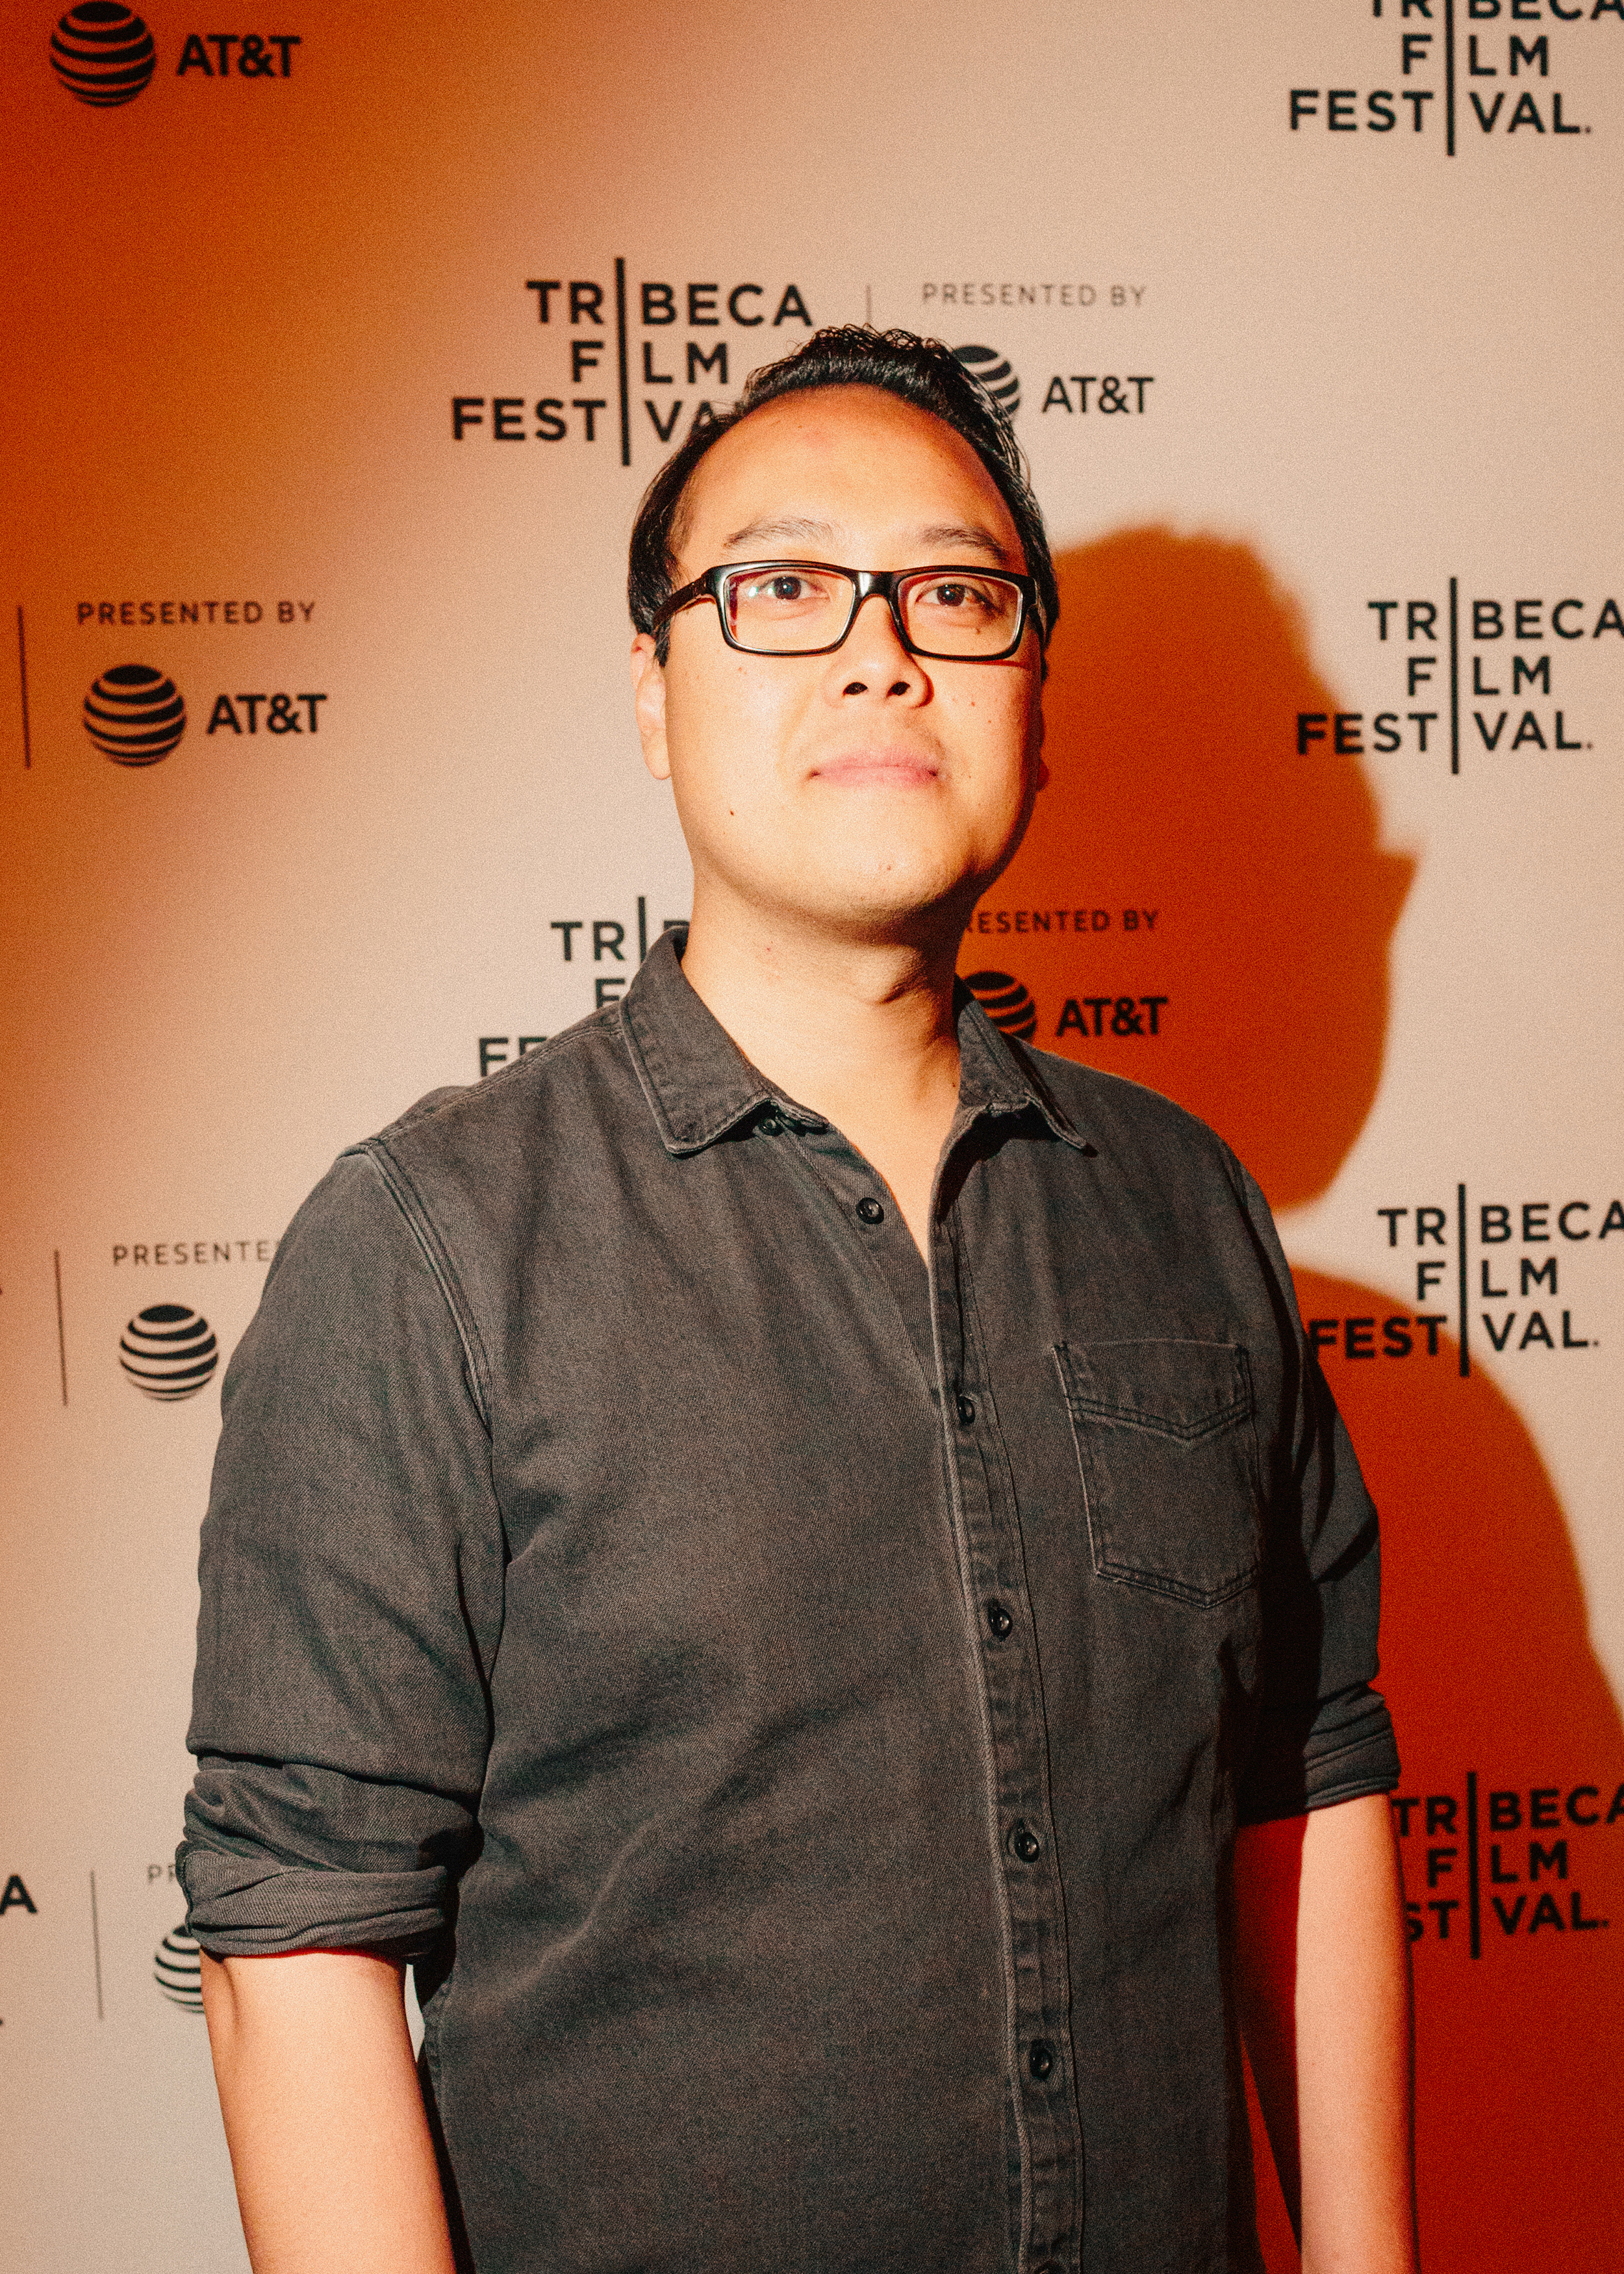   Tribeca Film Festival  New Filmmakers Party Bowery Hotel, New York, 2019 